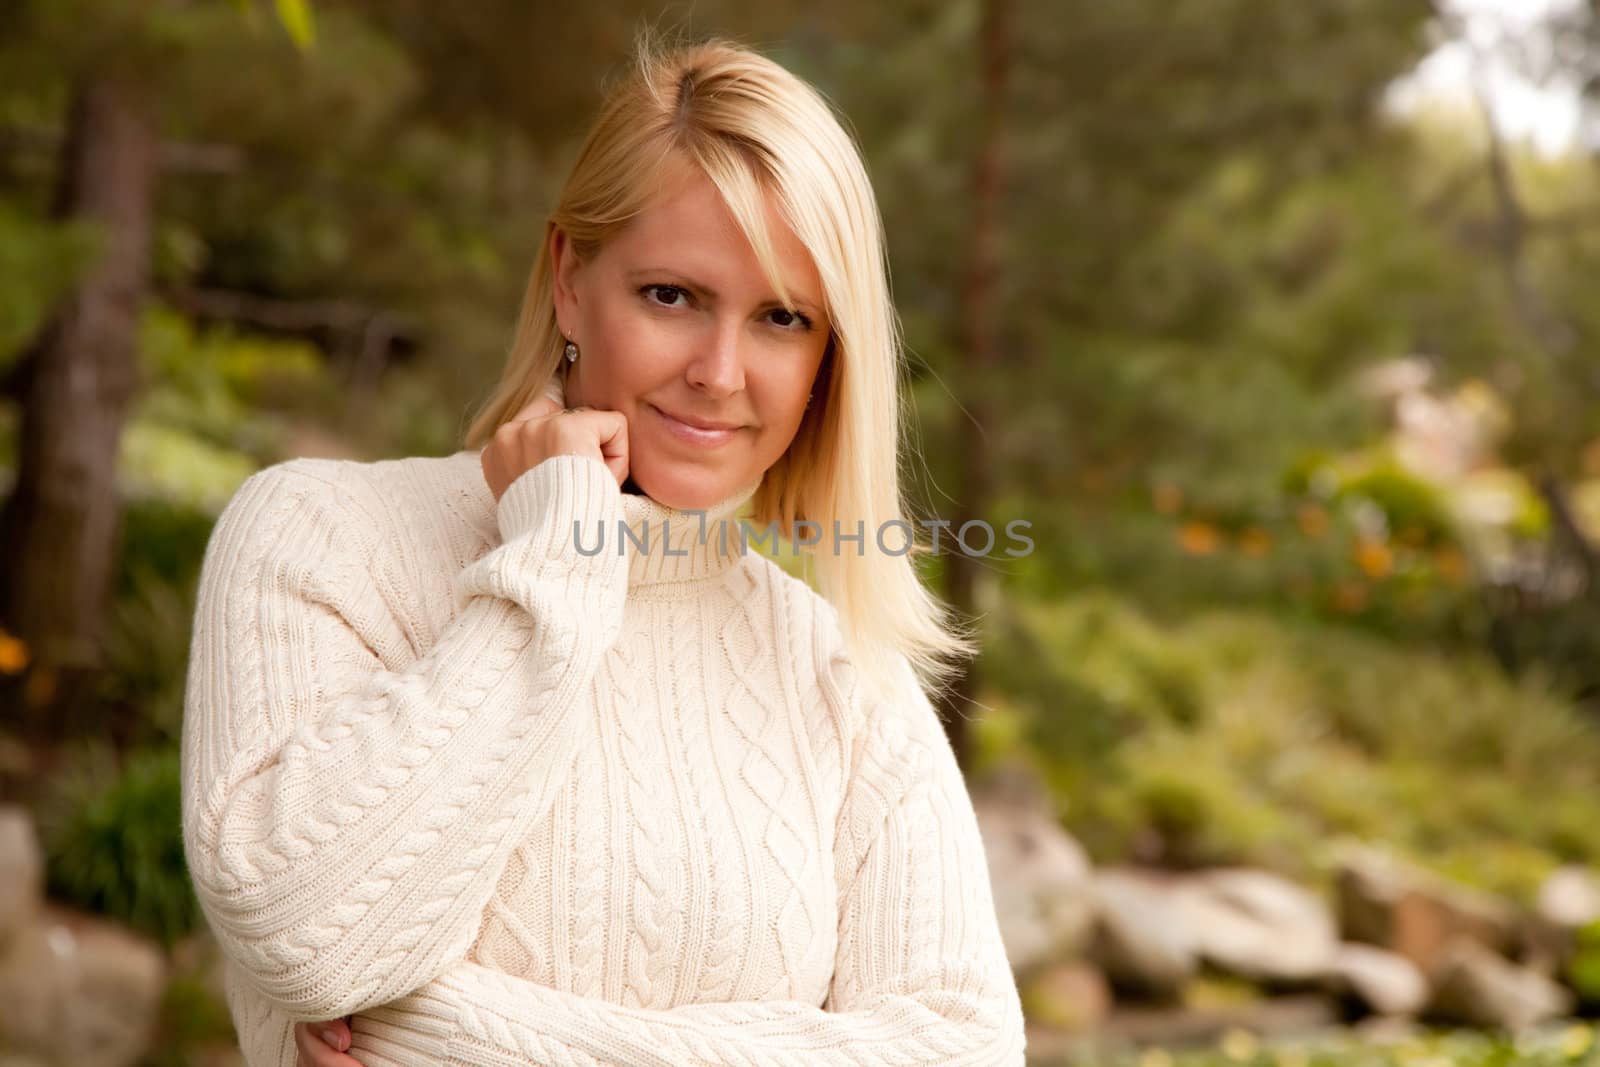 Attractive Blonde Woman in the Park by Feverpitched